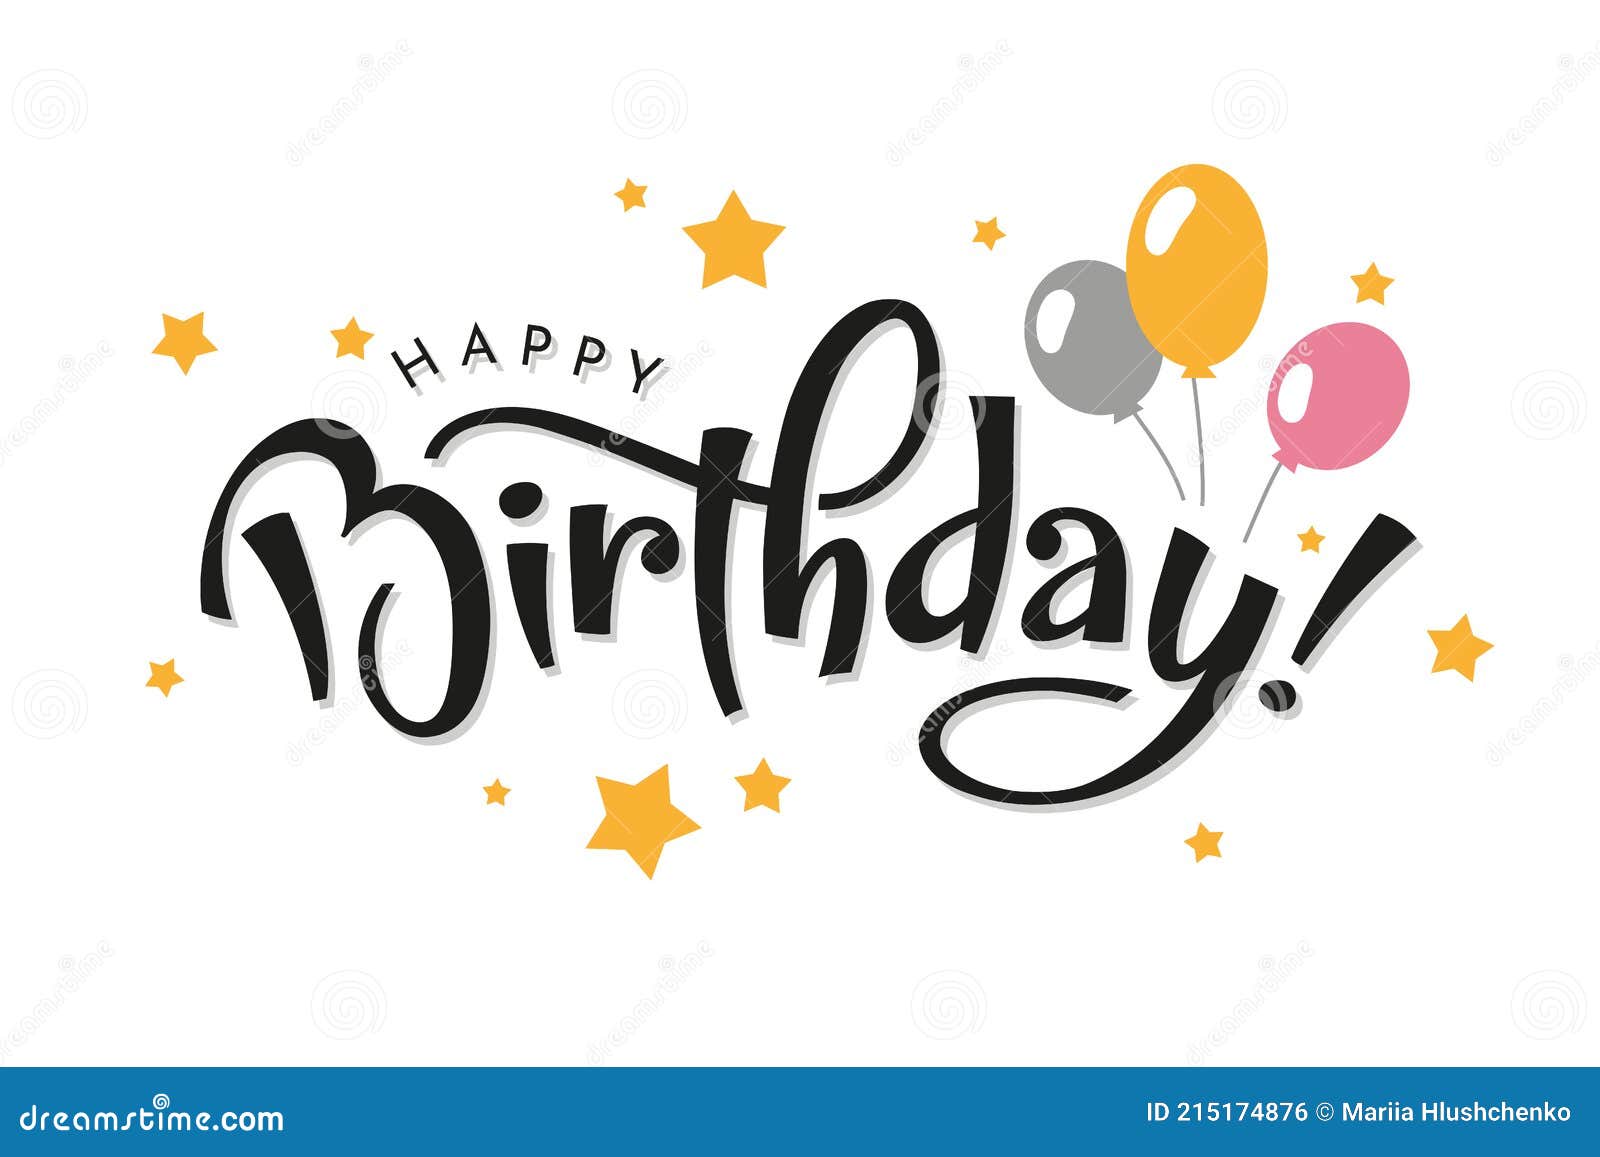 Happy Birthday Lettering with Balloons Stock Vector - Illustration of ...